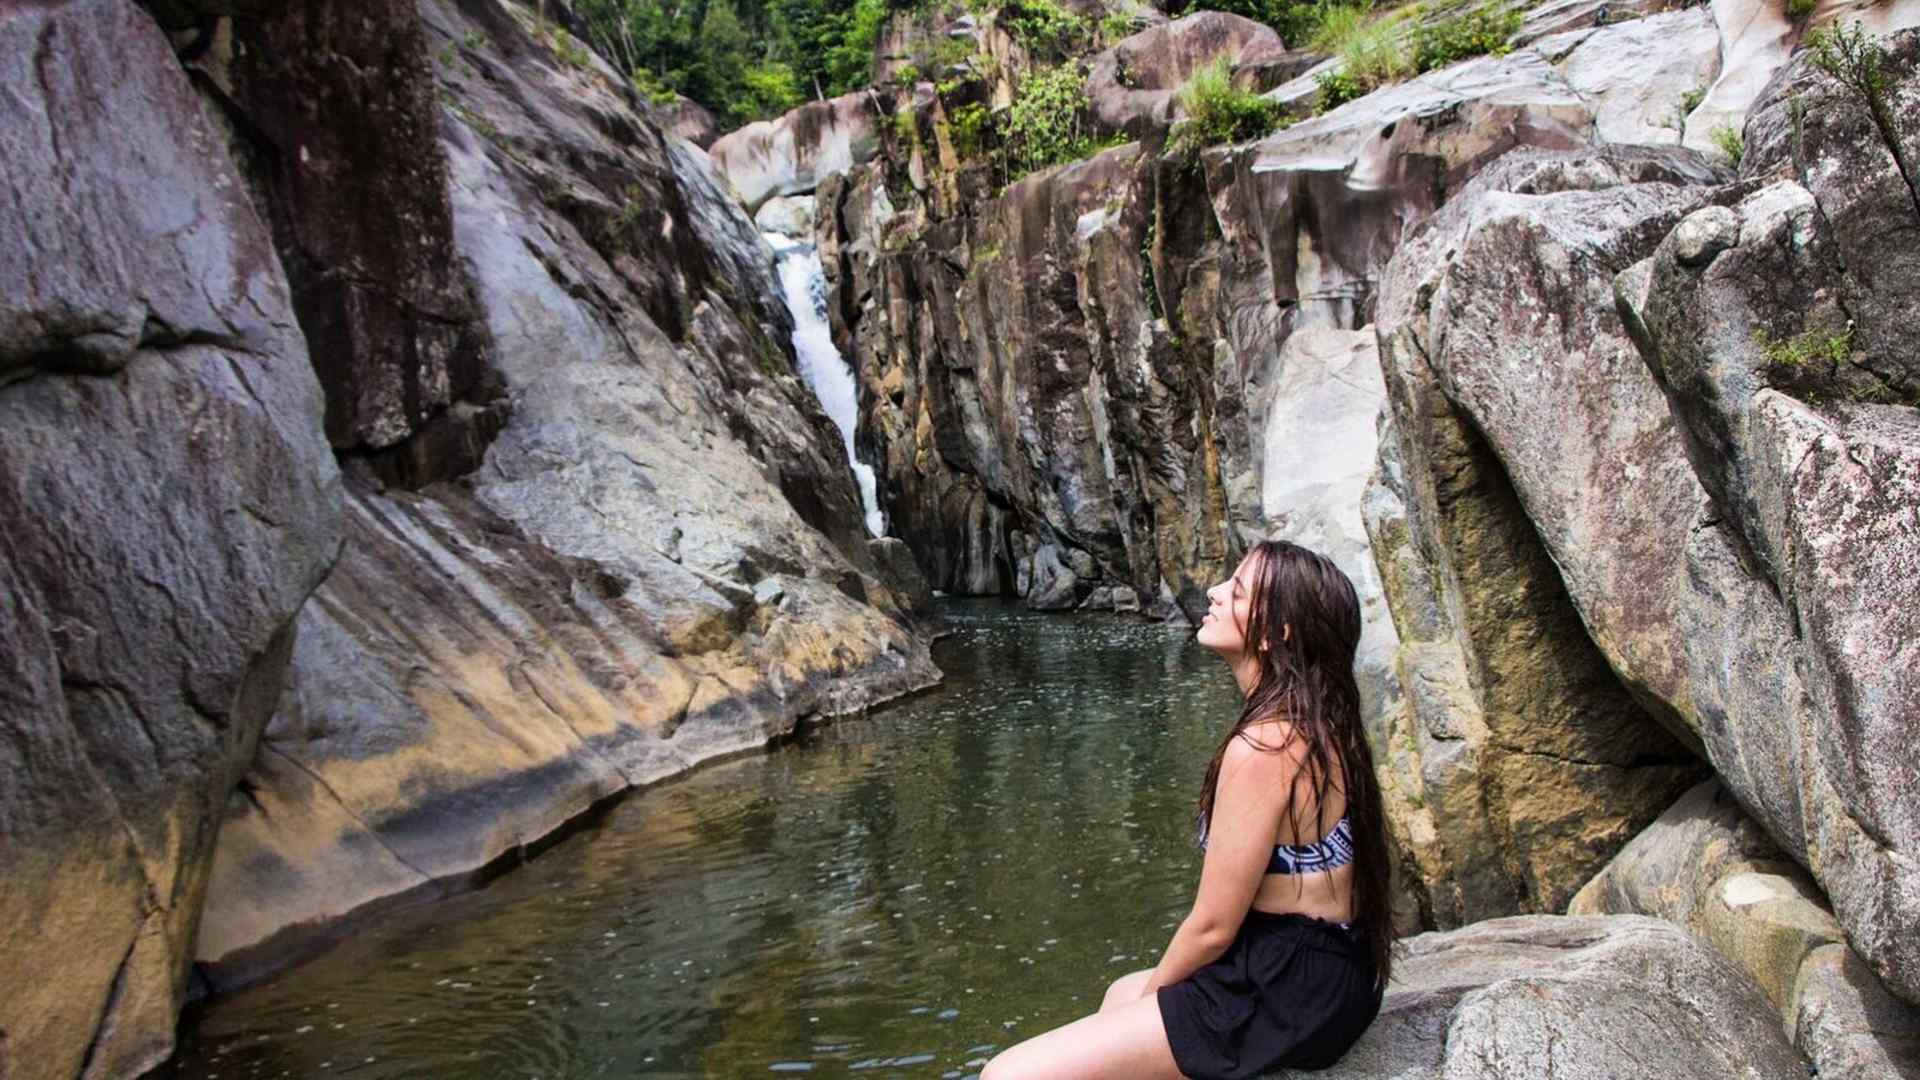 Gabriela sits on a rocky cliff by a waterfall